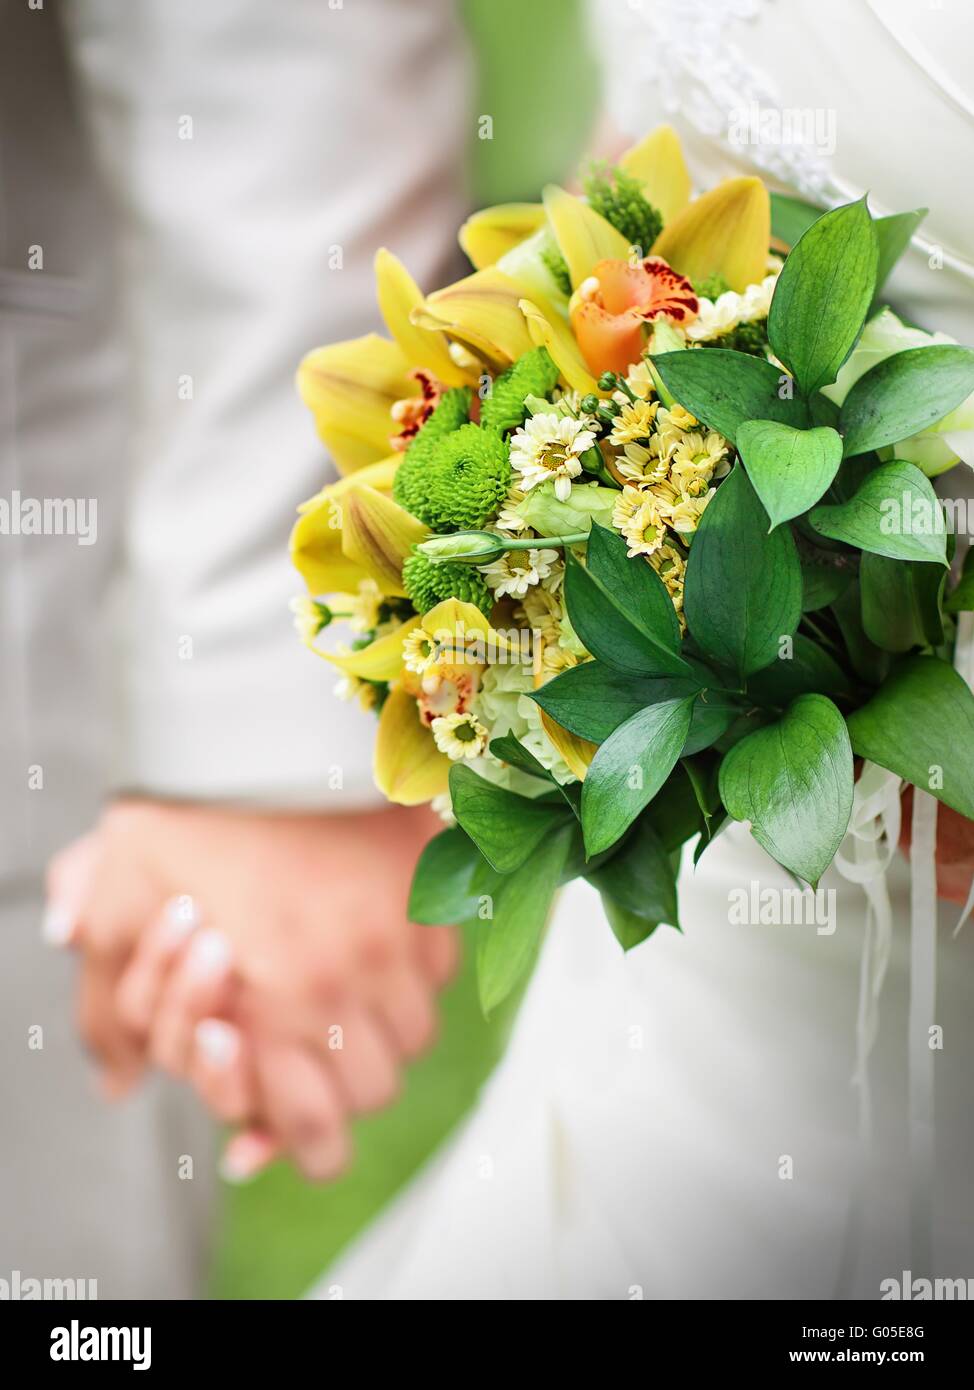 Detail of hands of wedding couple with wedding bouquet Stock Photo